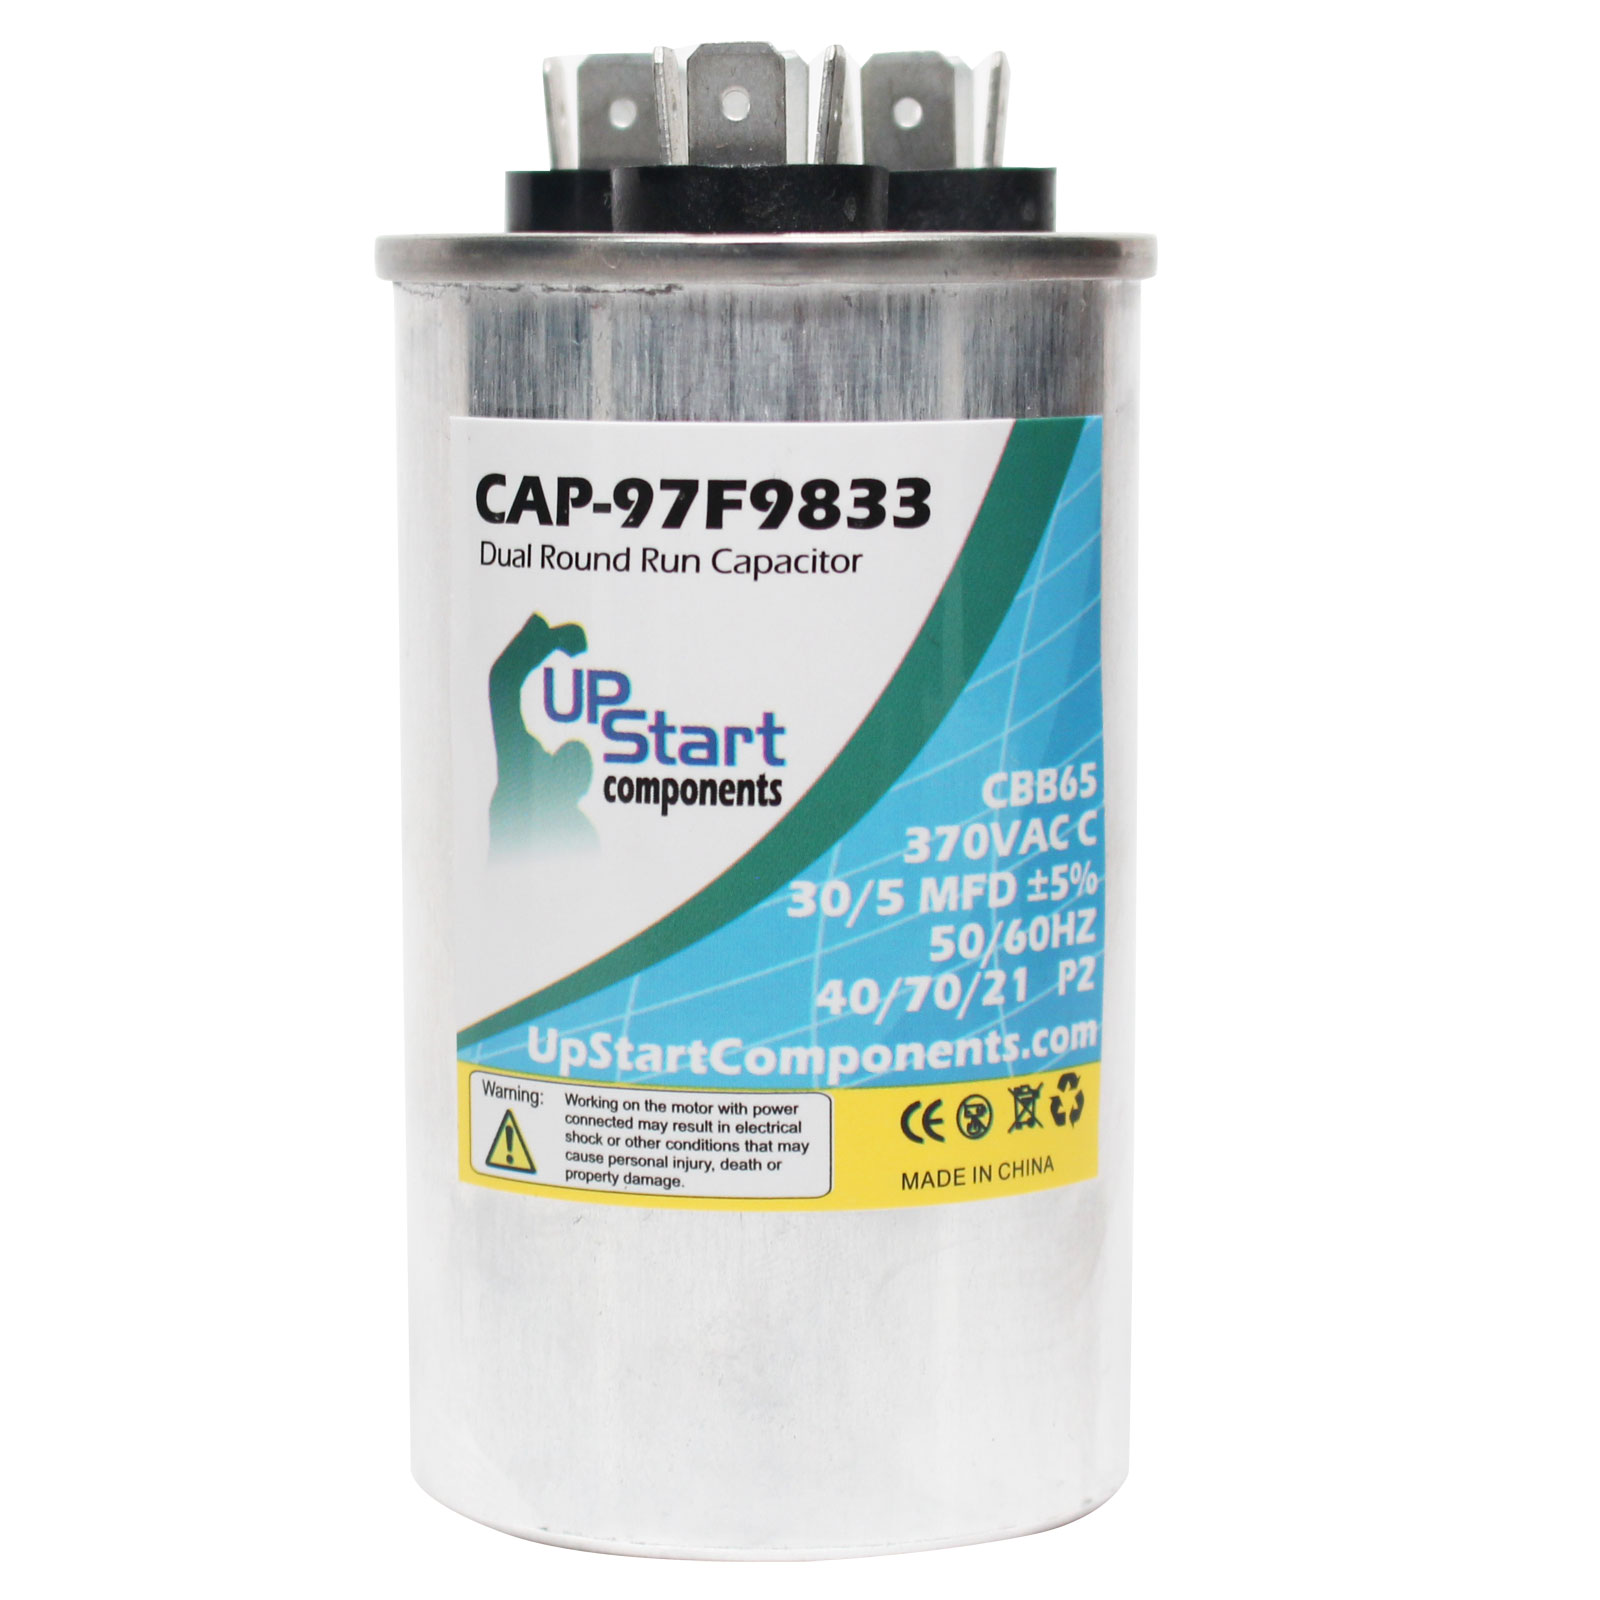 UpStart Components 30/5 MFD 370 Volt Dual Round Run Capacitor Replacement for Carrier 38TR024300 - CAP-97F9833